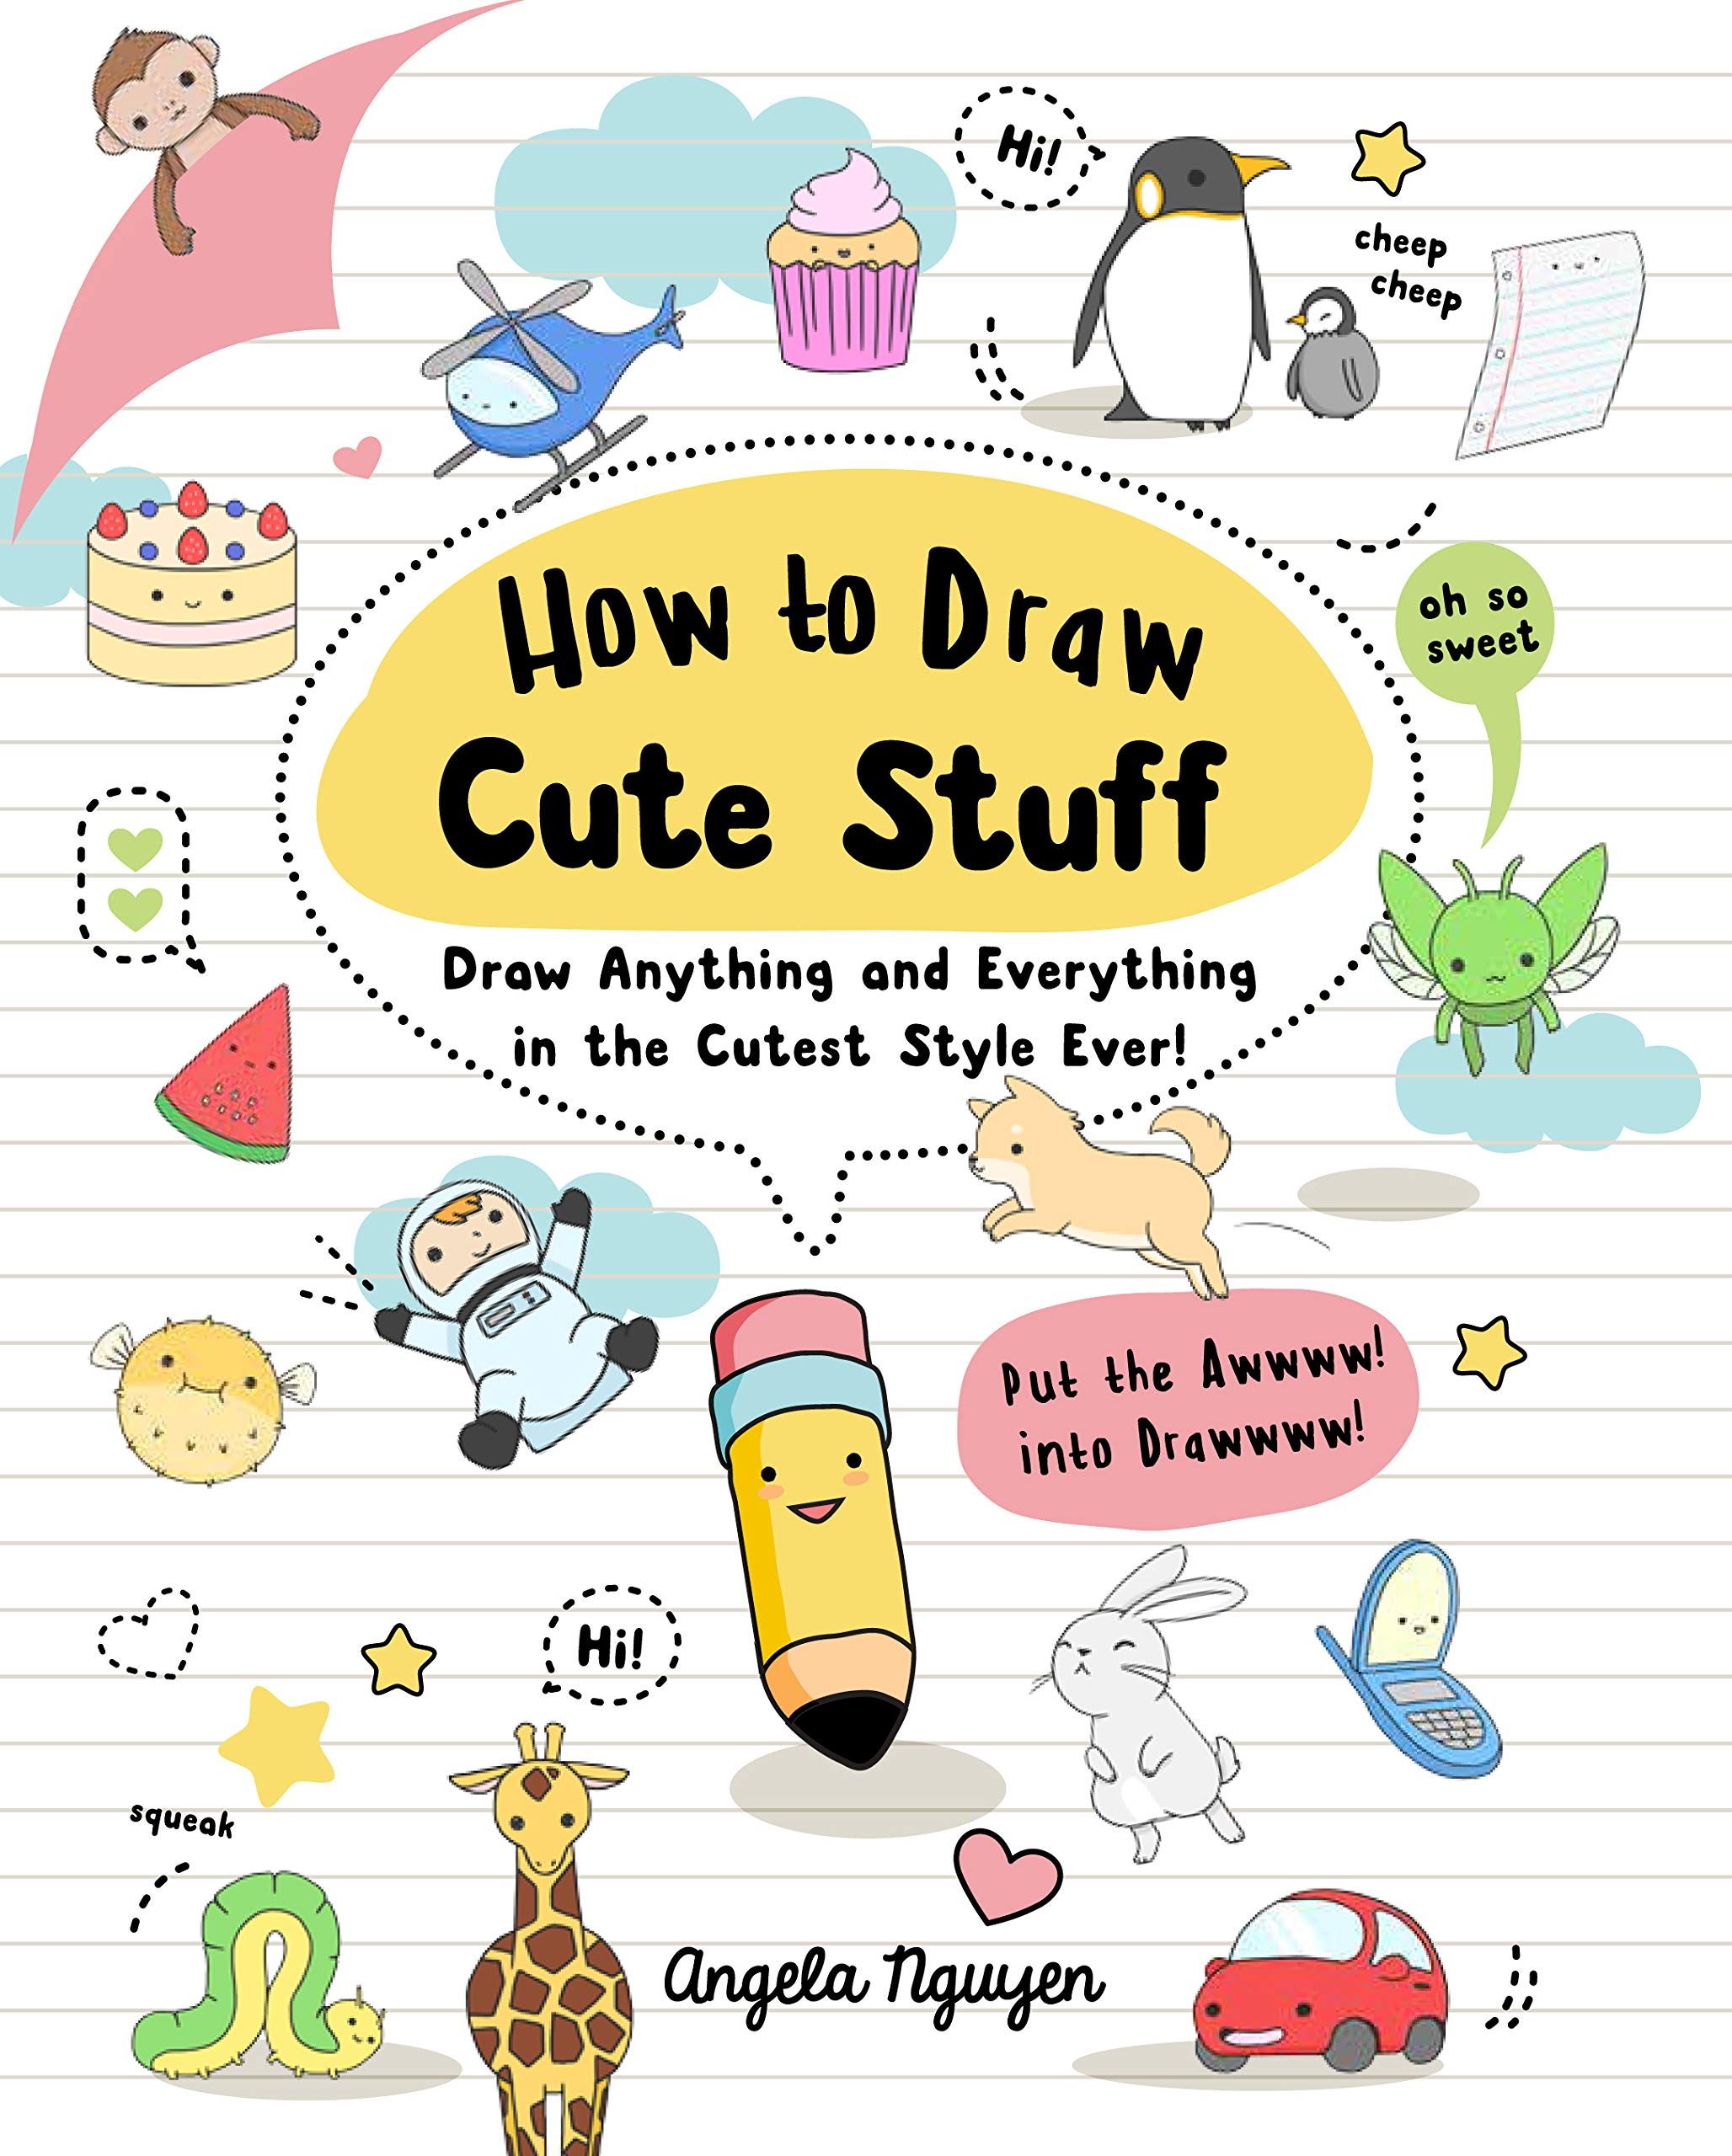 Cover of how to draw cute stuff by nguyen